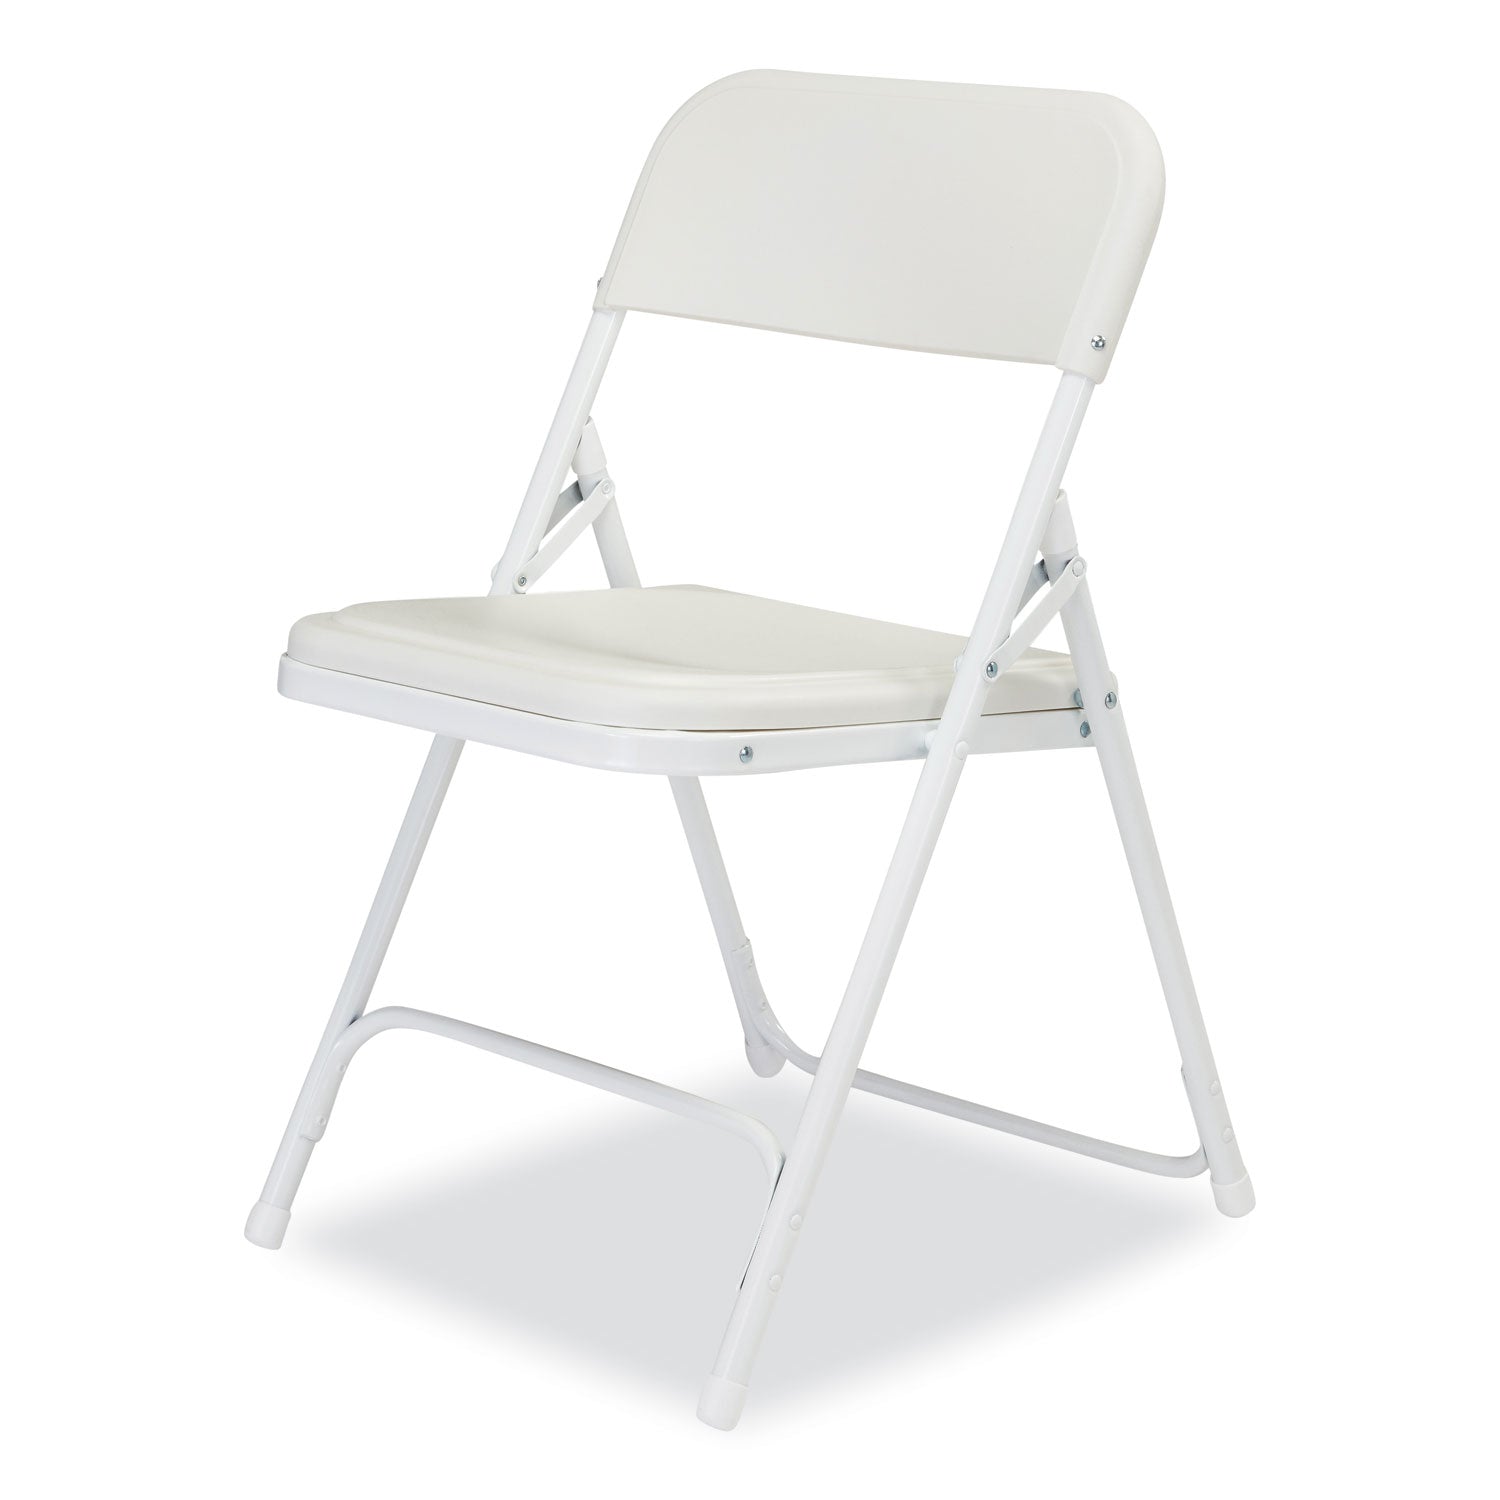 800-series-plastic-folding-chair-supports-500-lb-18-seat-ht-bright-white-seat-white-base-4-ct-ships-in-1-3-bus-days_nps821 - 3